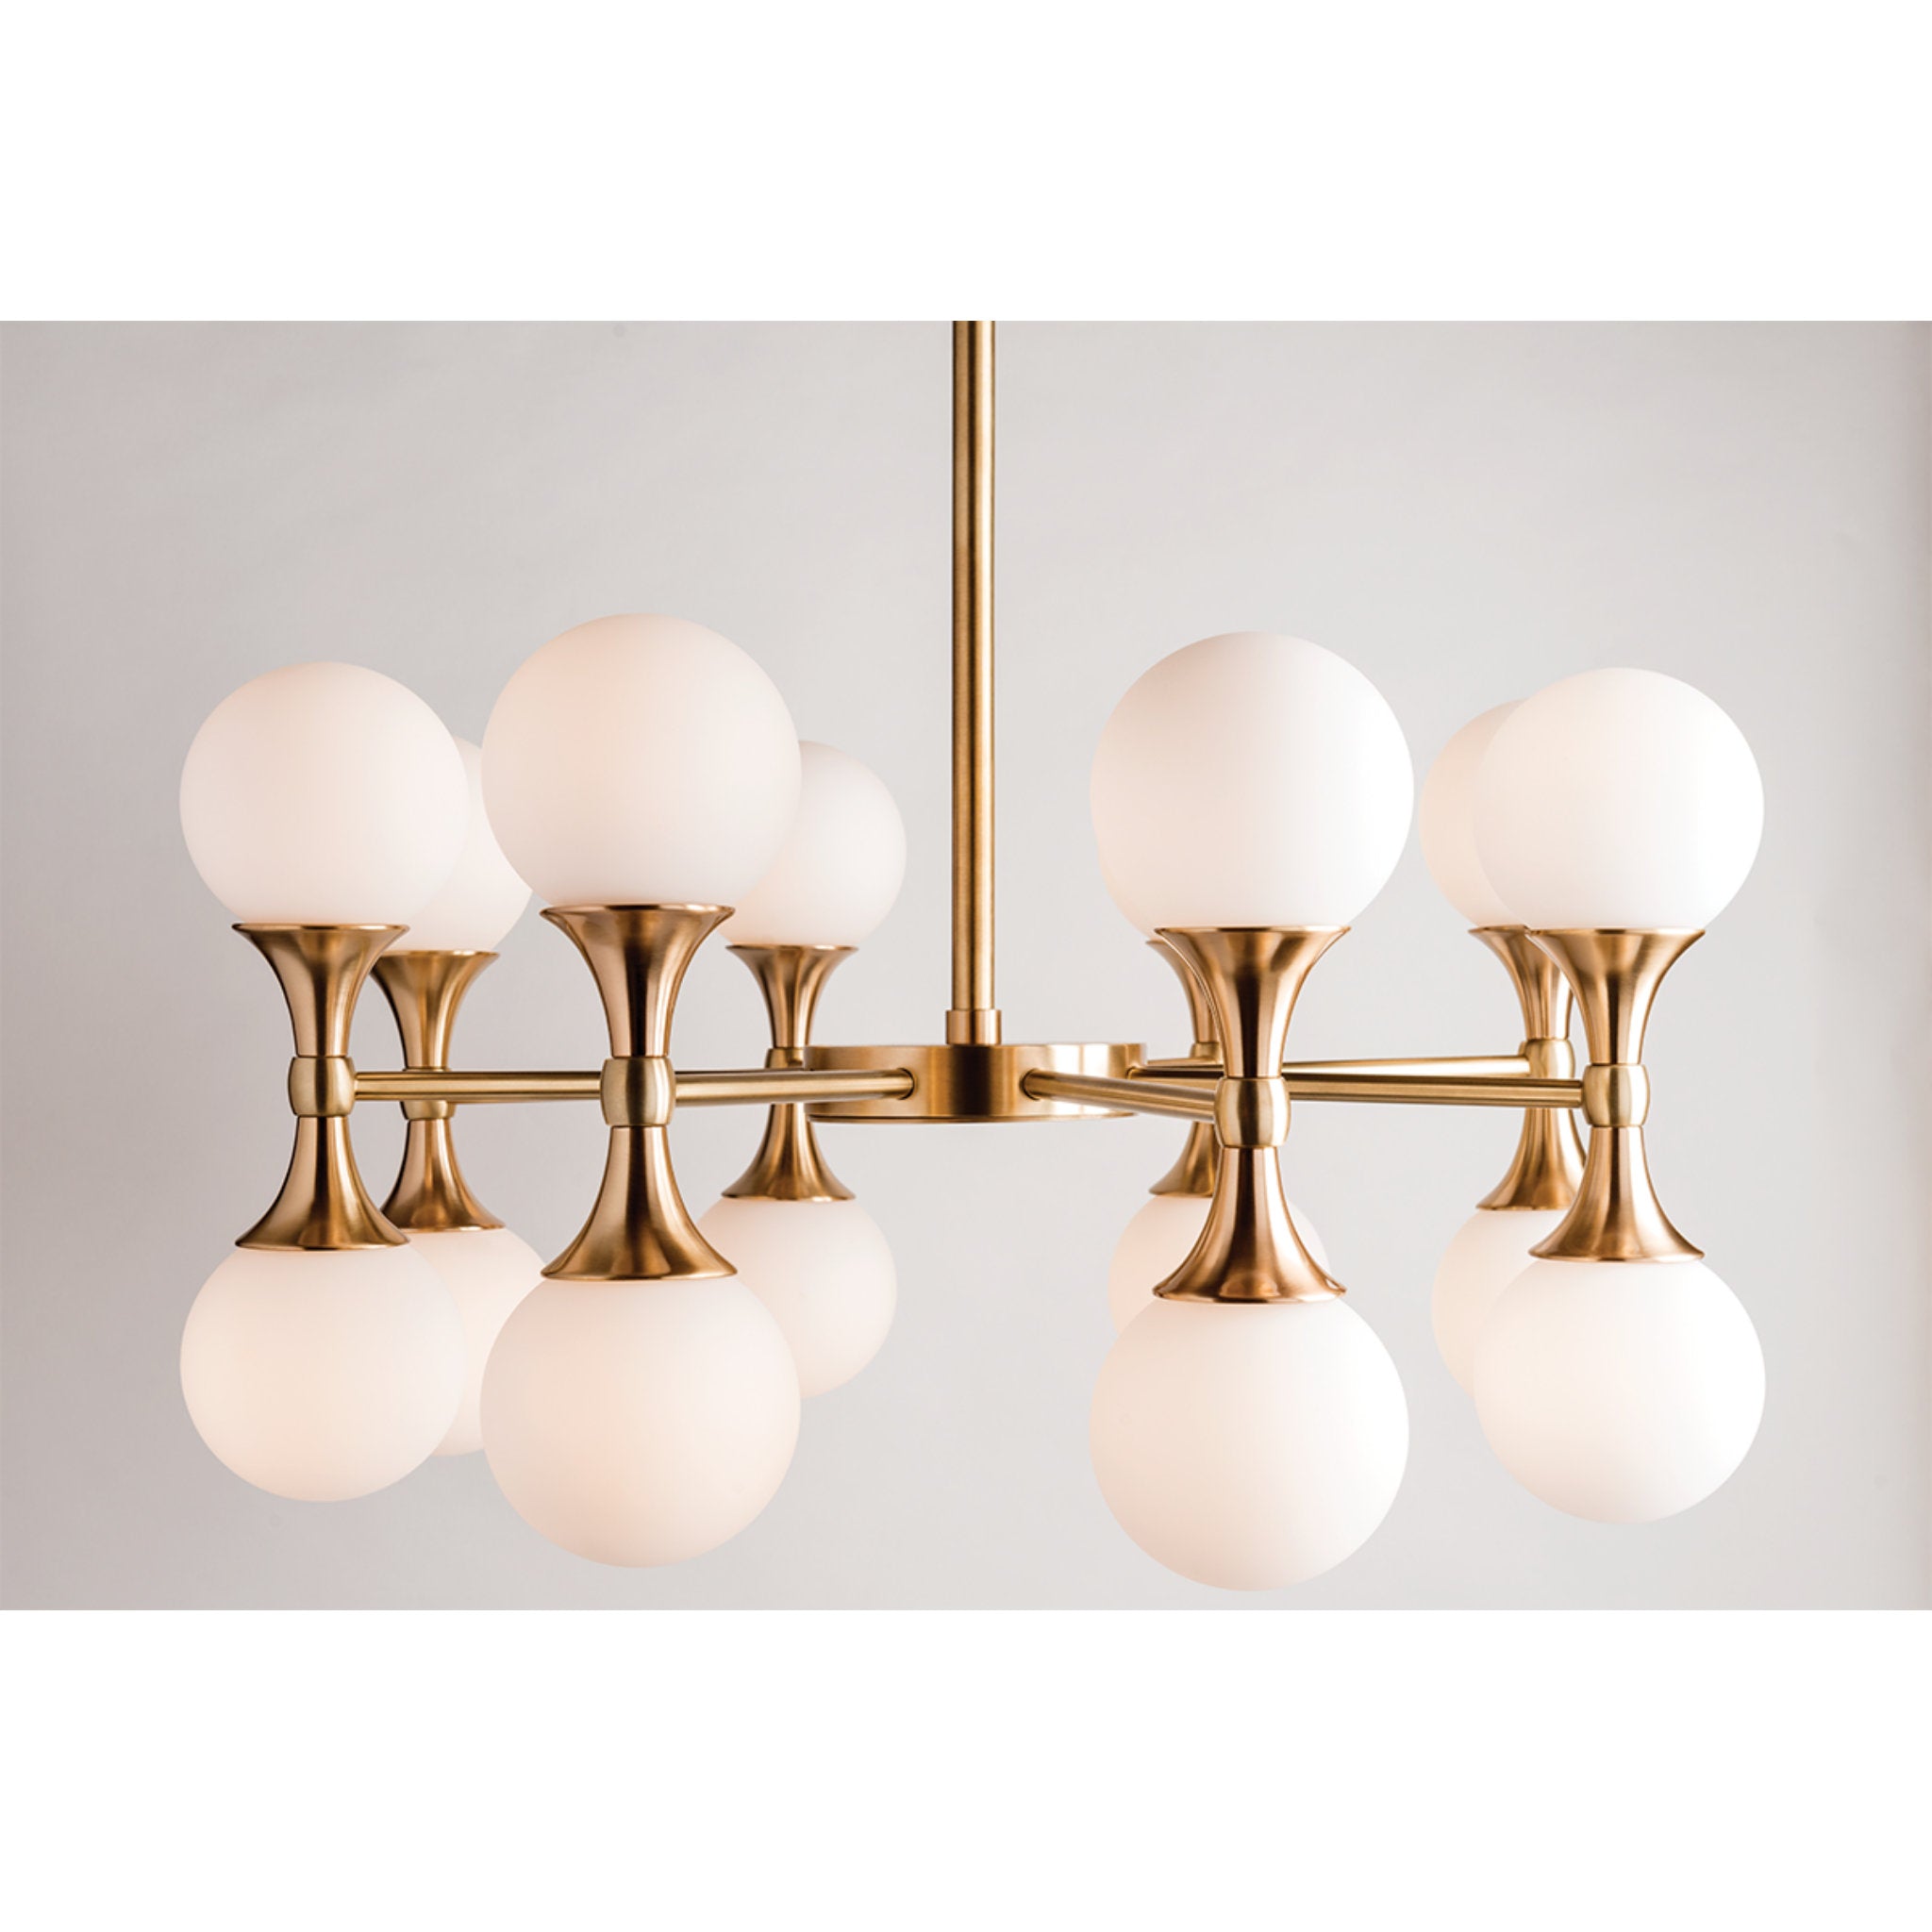 Astoria 2 Light Wall Sconce in Aged Brass